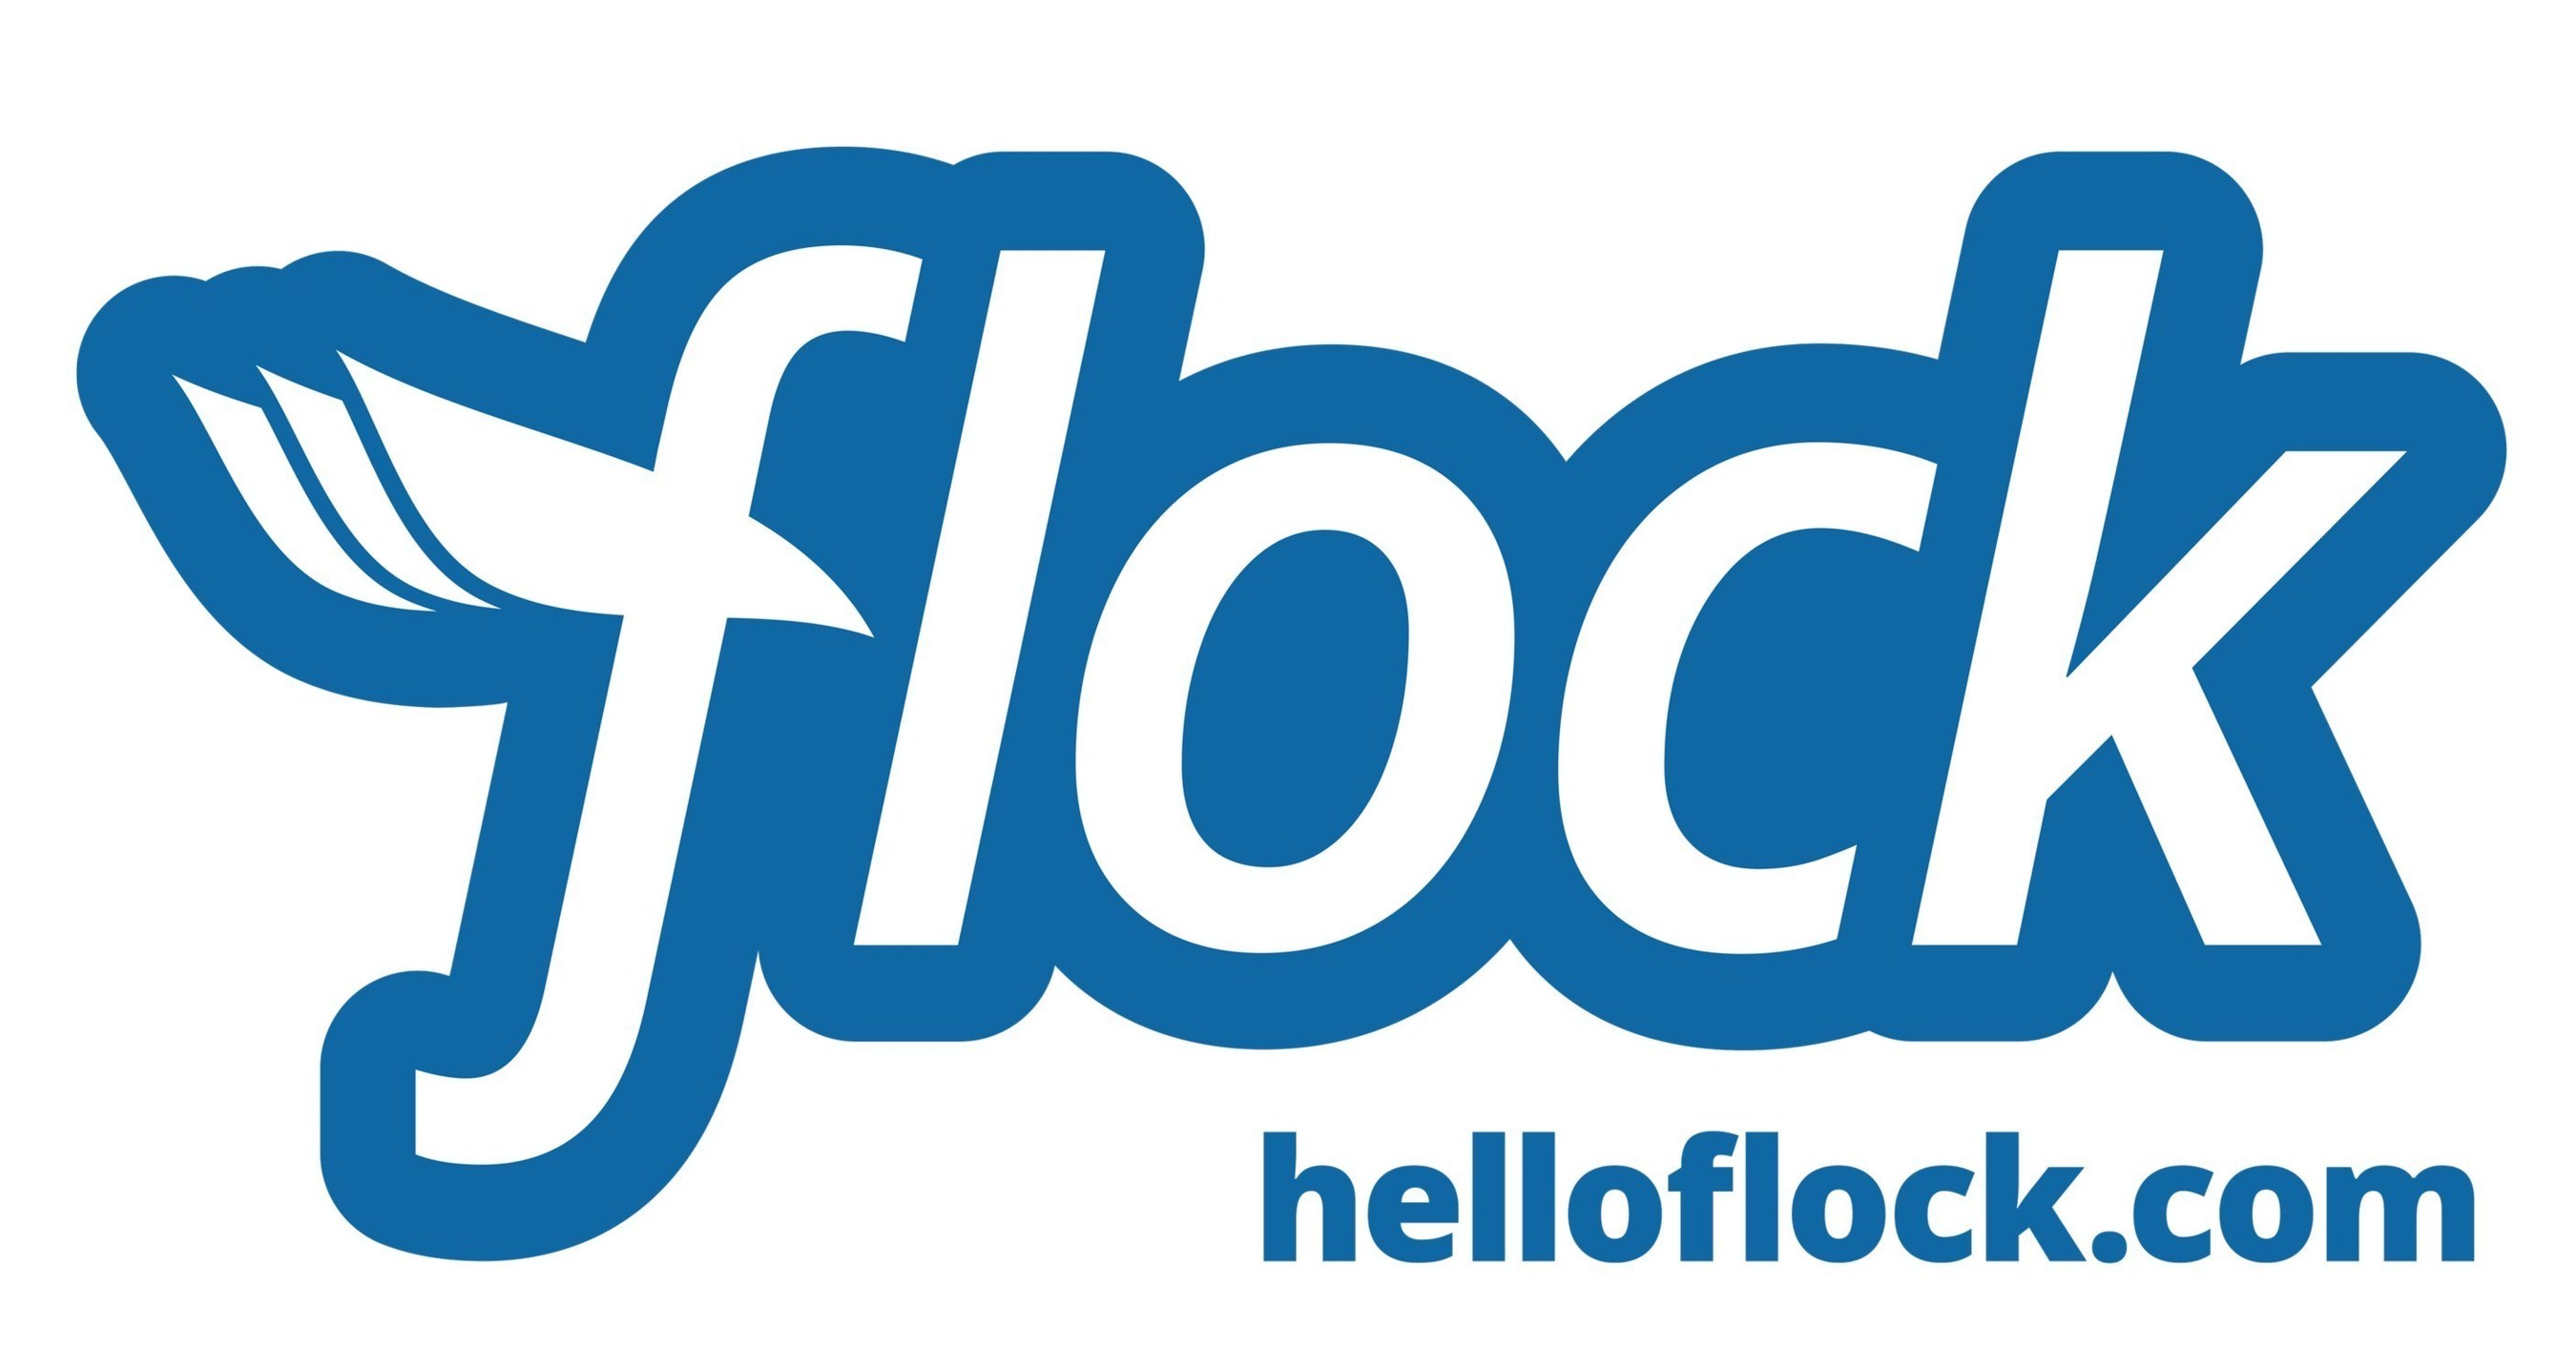 Flock Raises $3.5 Million in Series A Funding from The Hartford and  Existing Investors